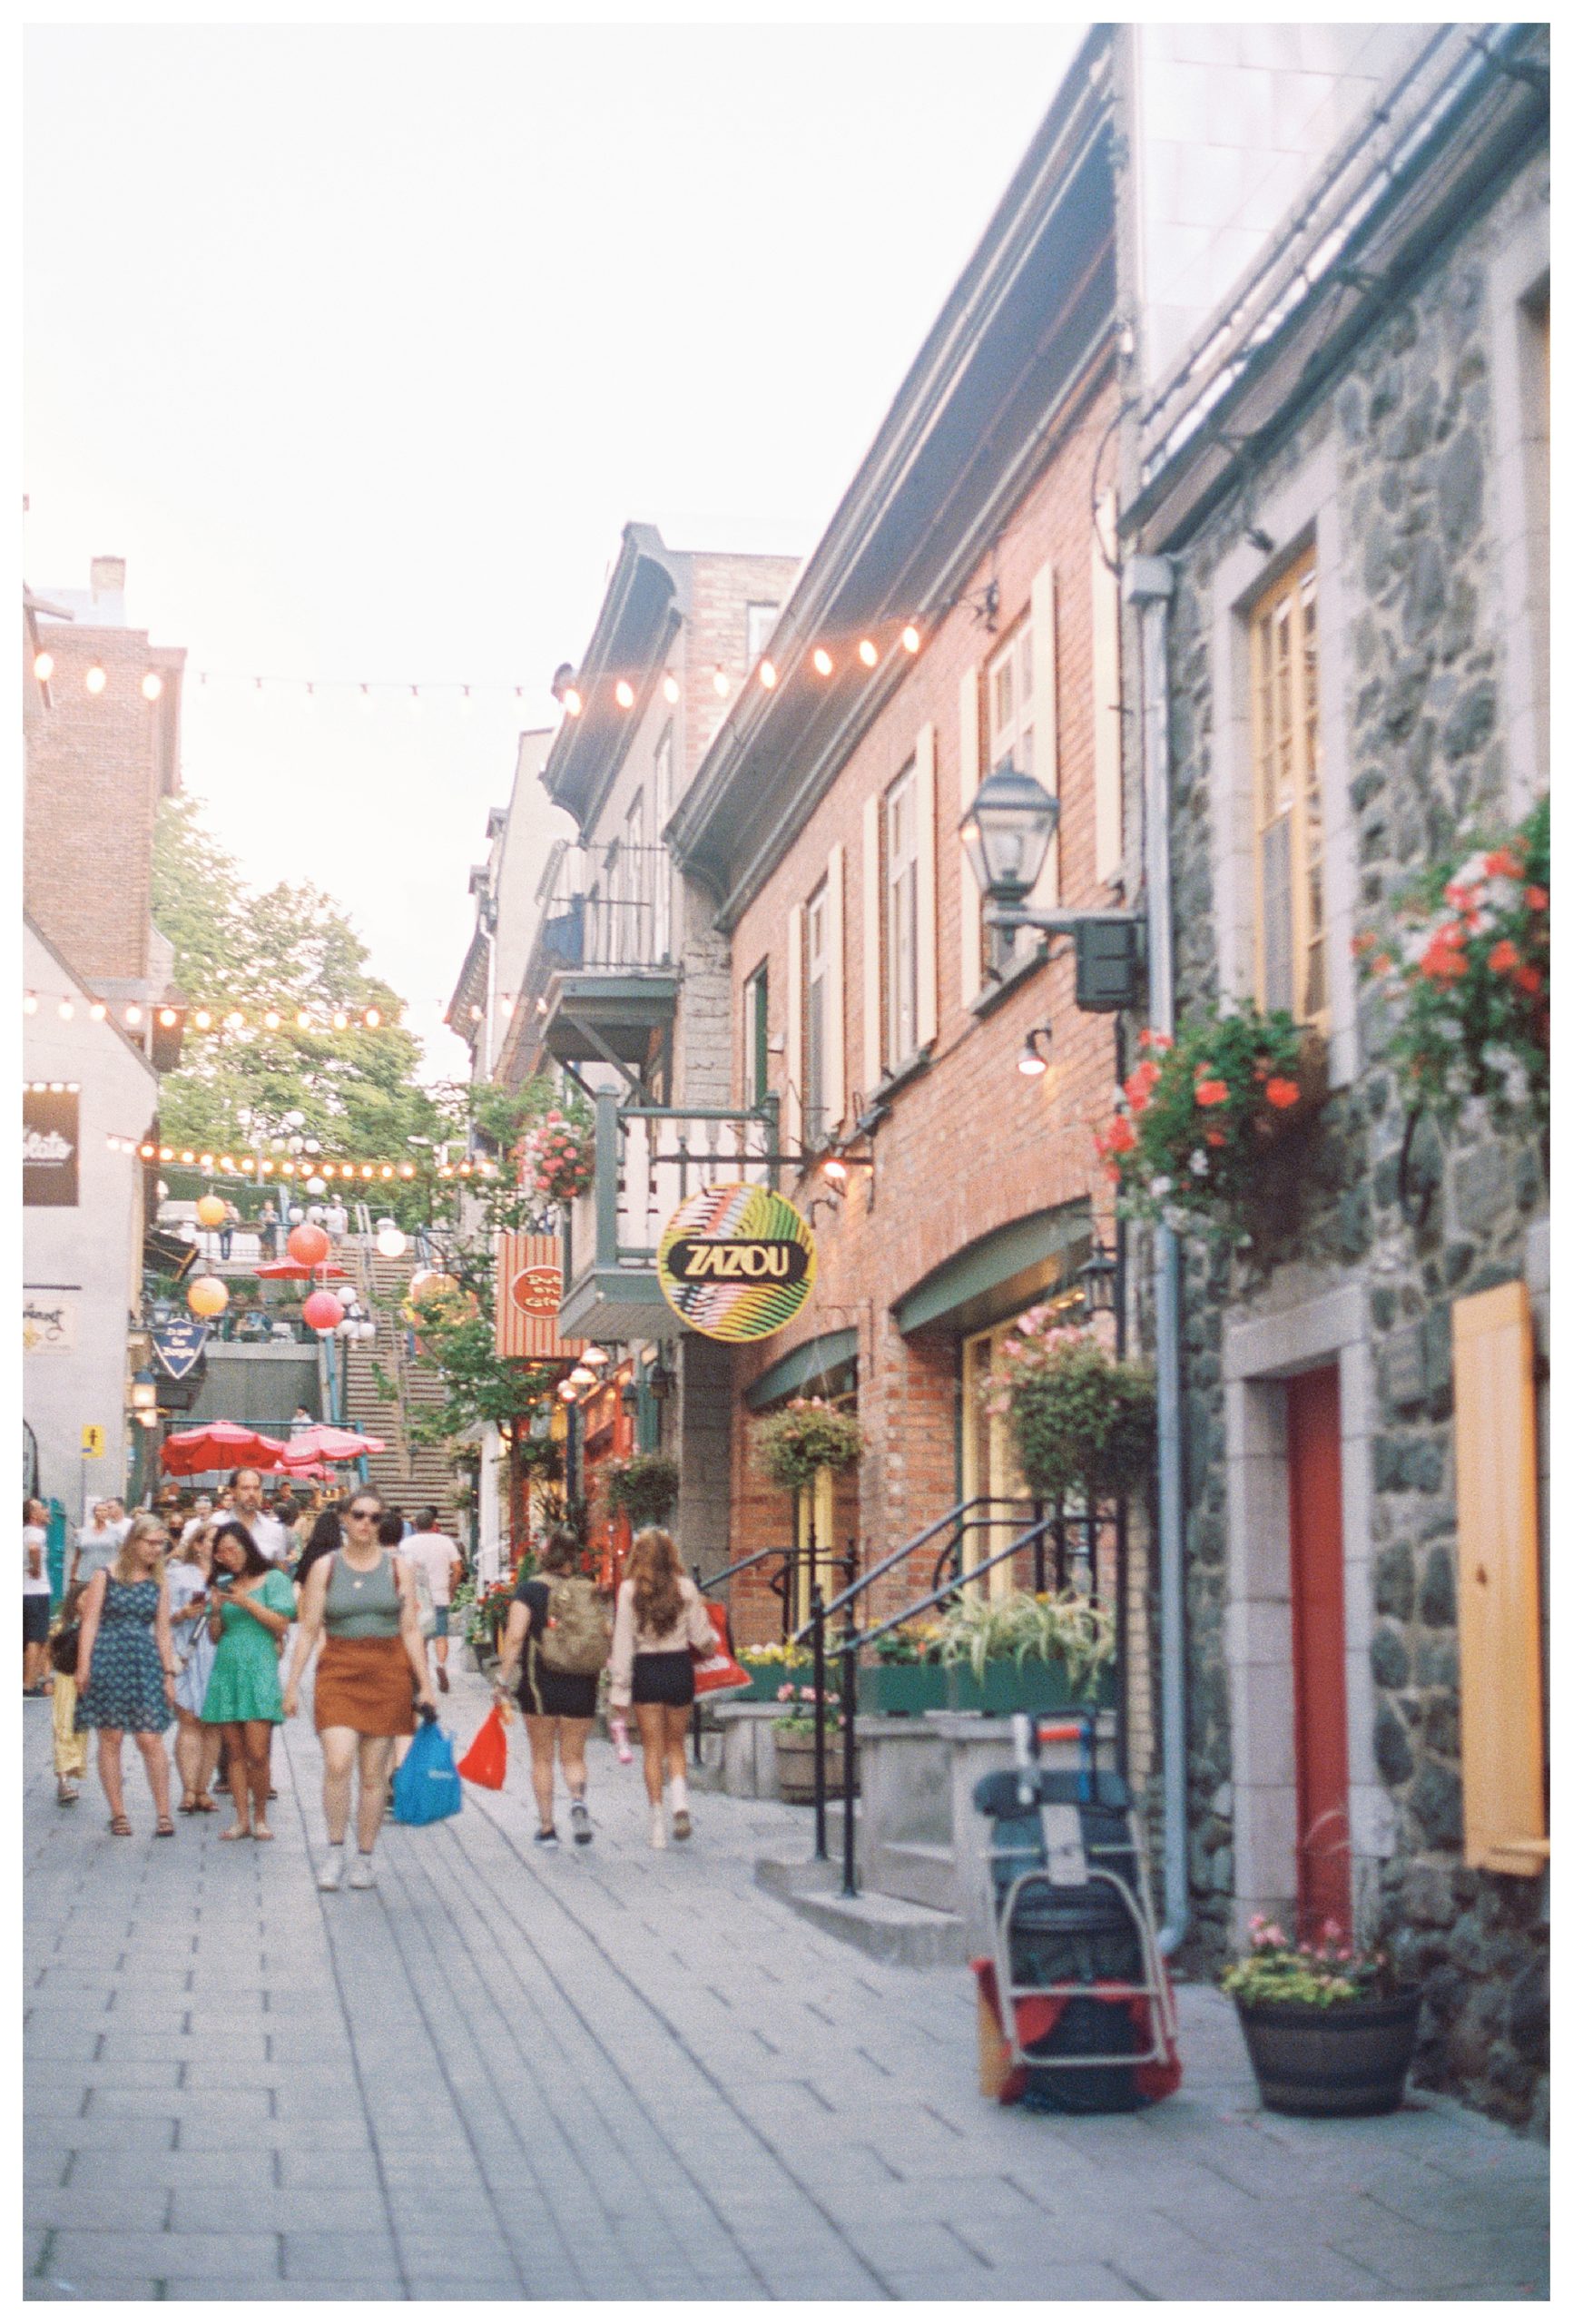 Busy street in Old Quebec City.